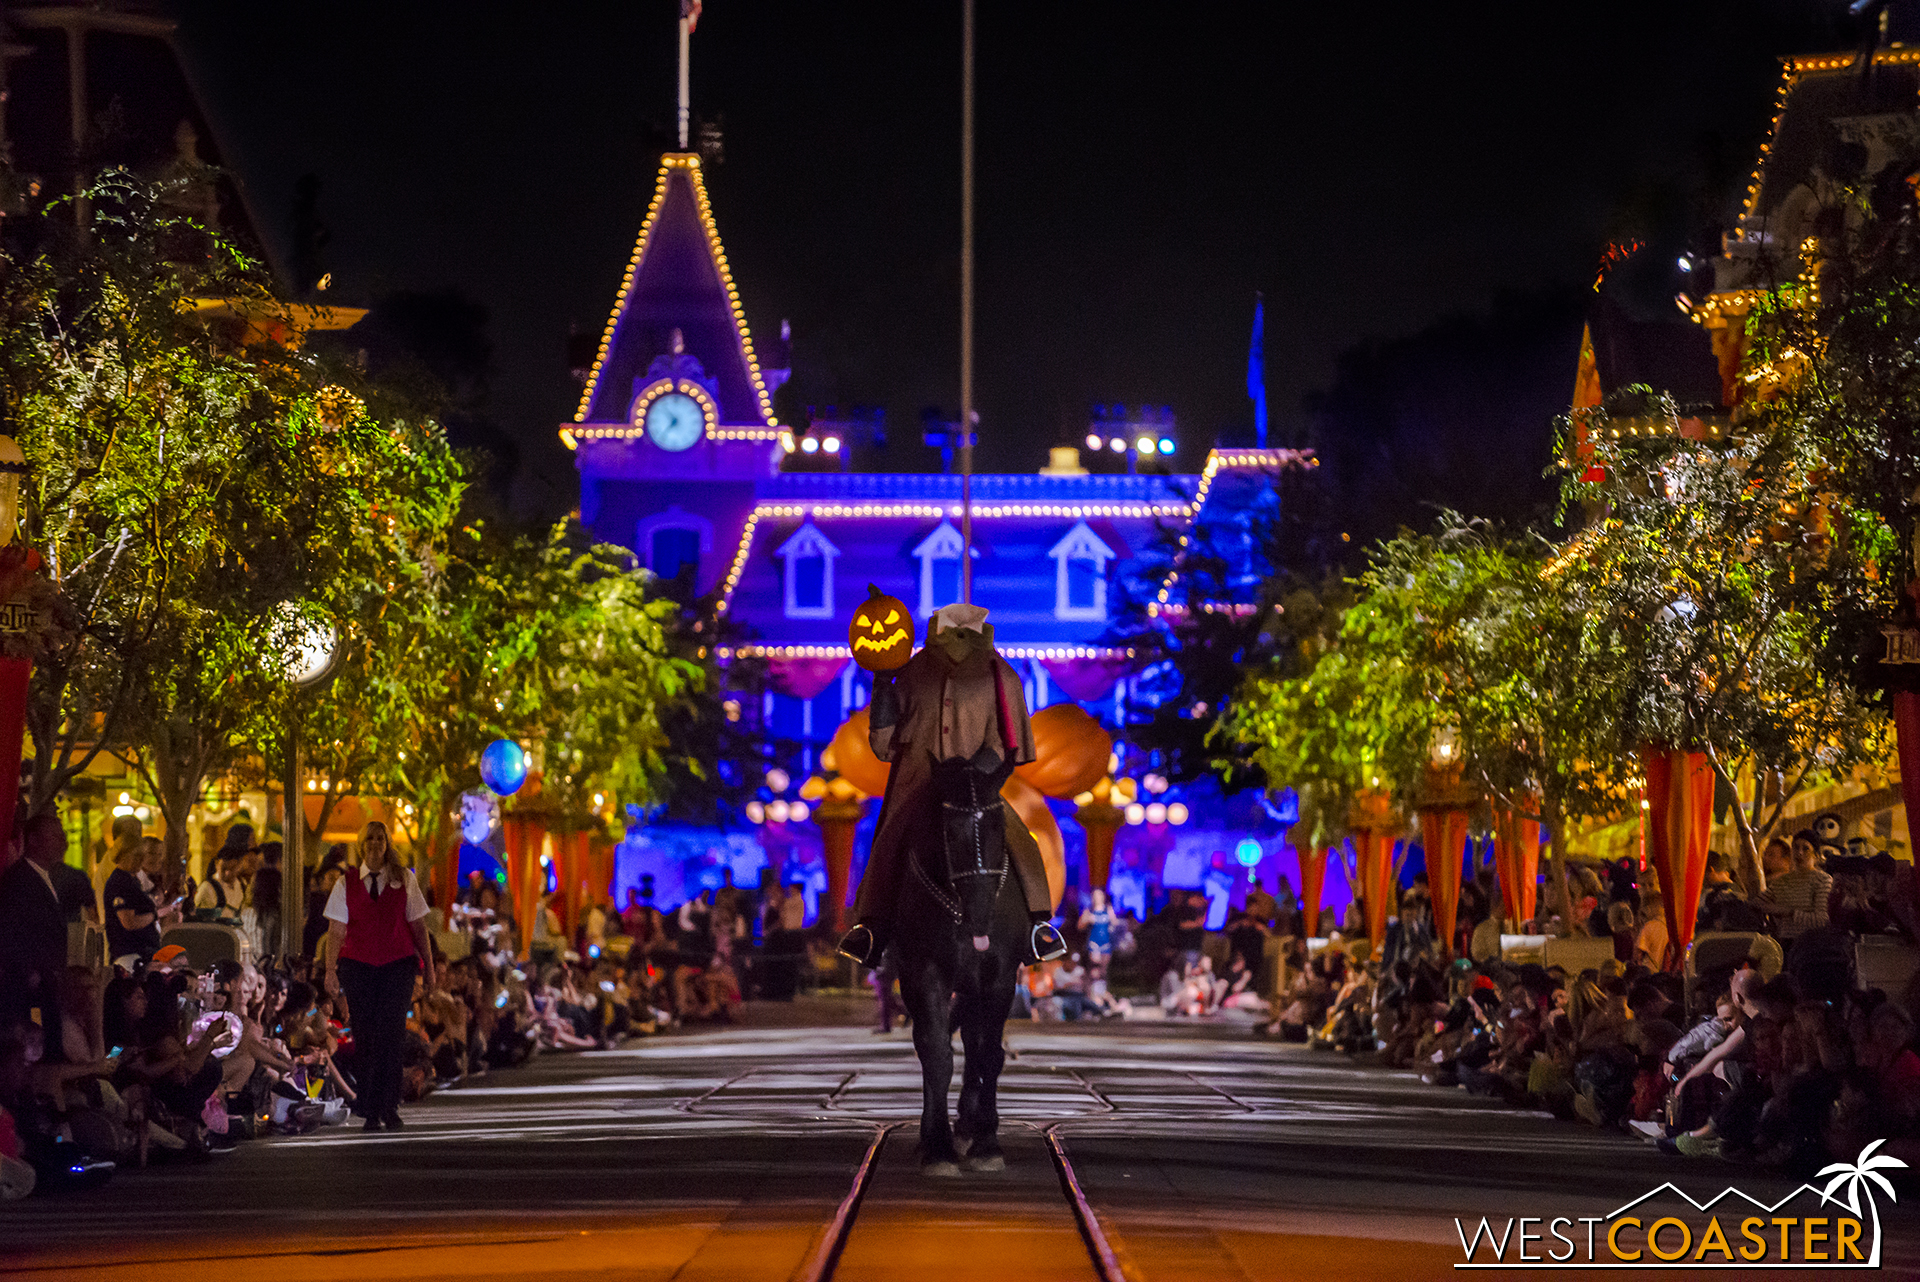  Adopting a modified form of Disney World tradition, the parade opens with the Headless Horseman. 